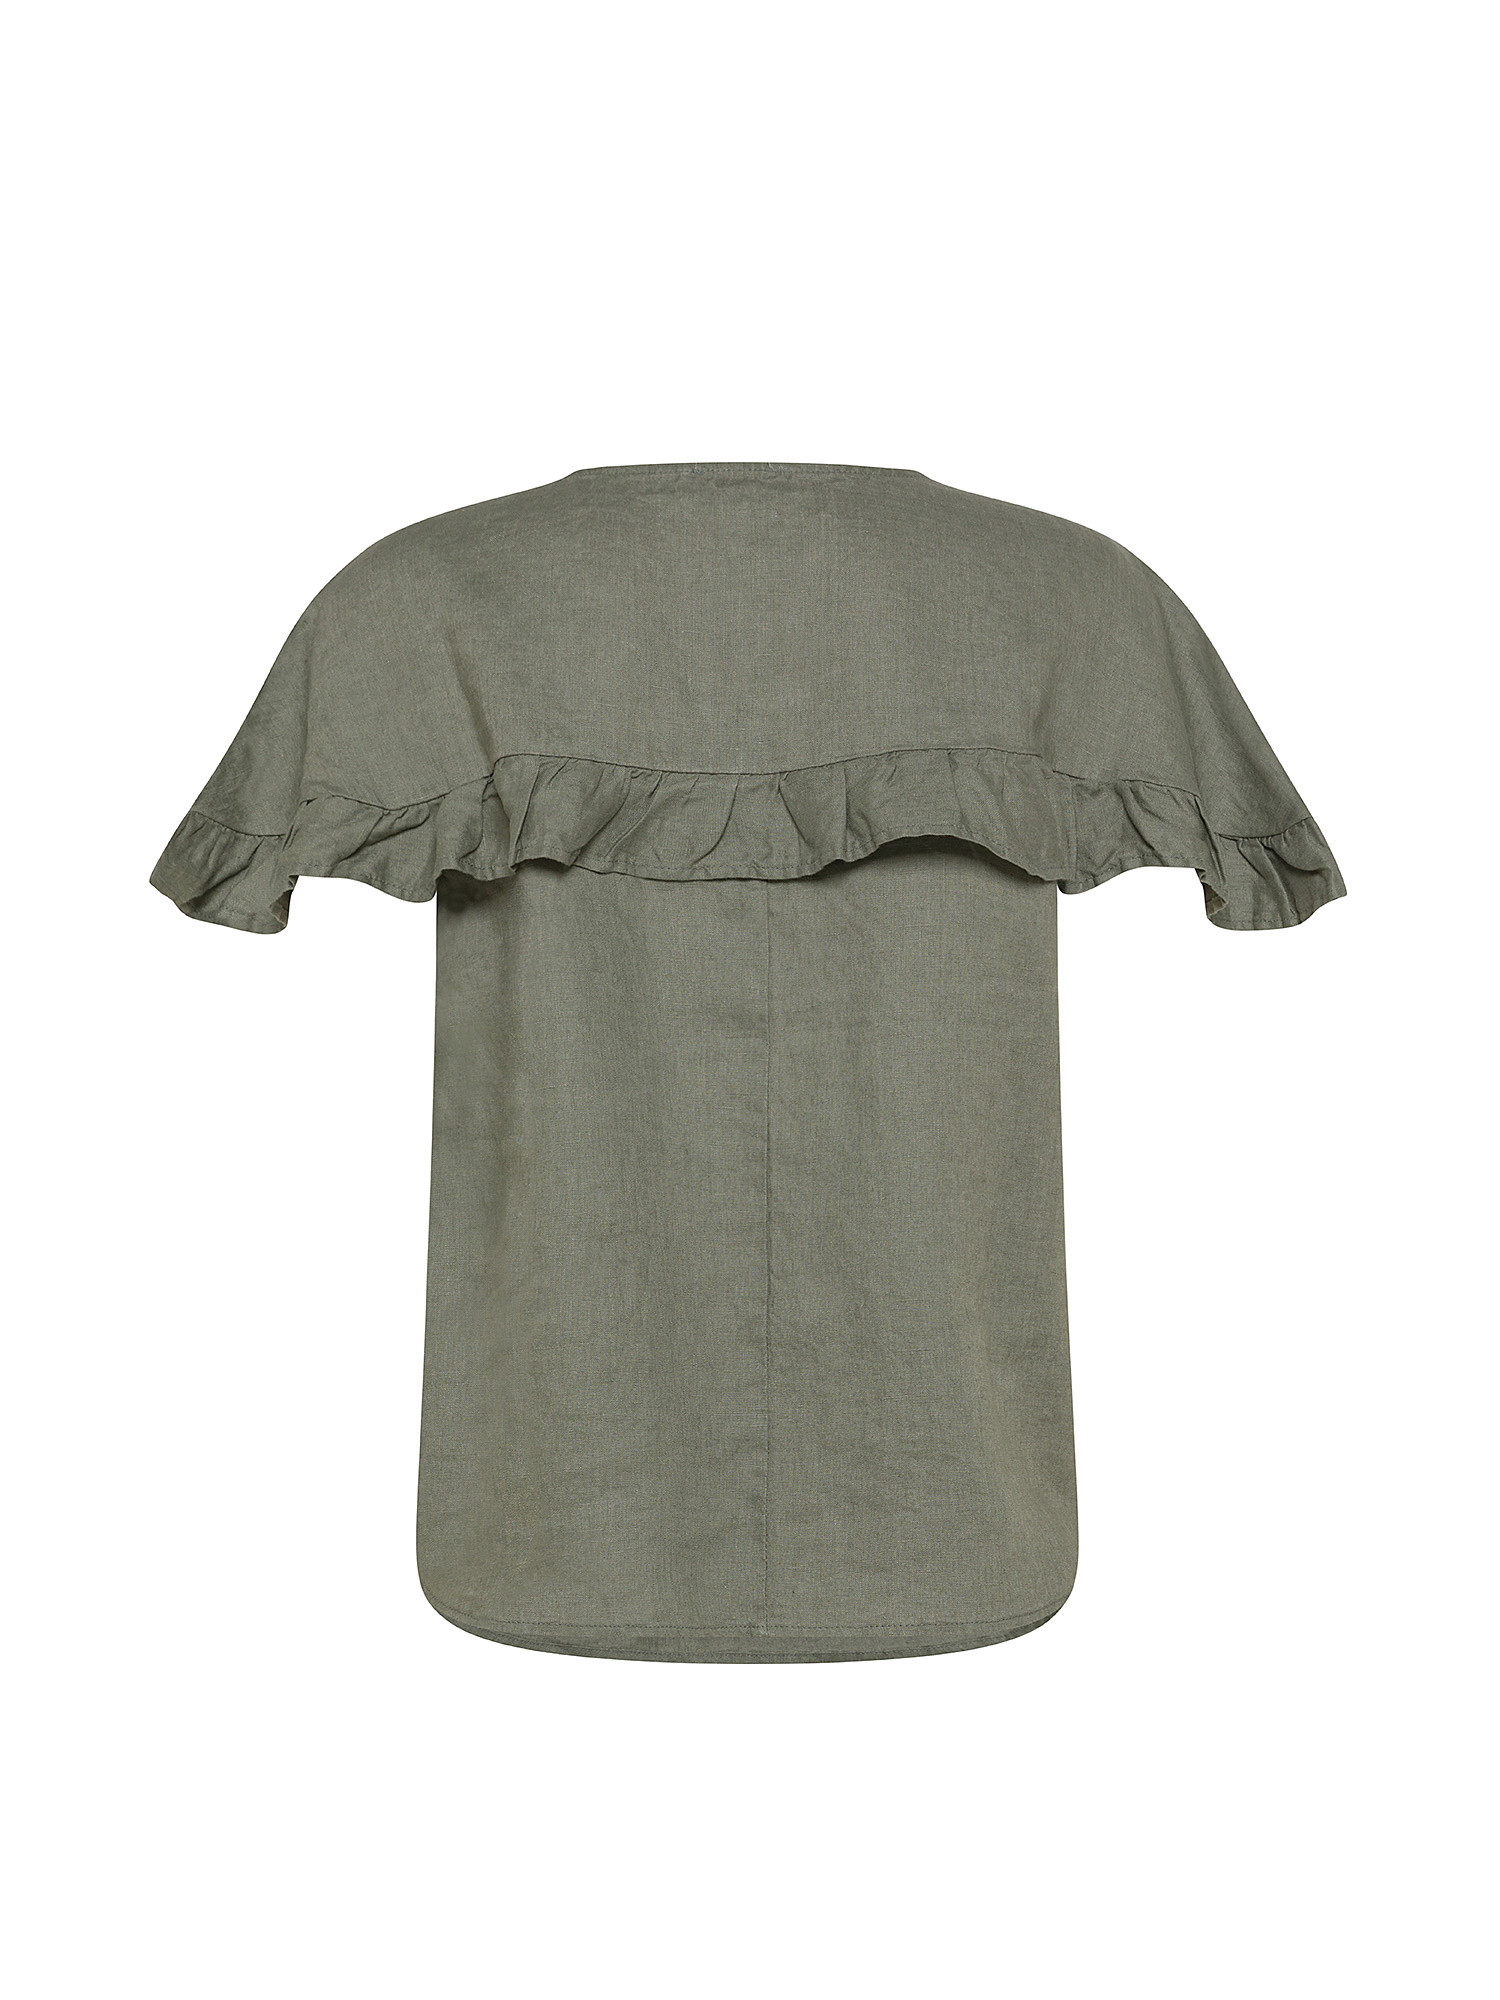 Koan - Blusa in lino con volant, Verde salvia, large image number 1